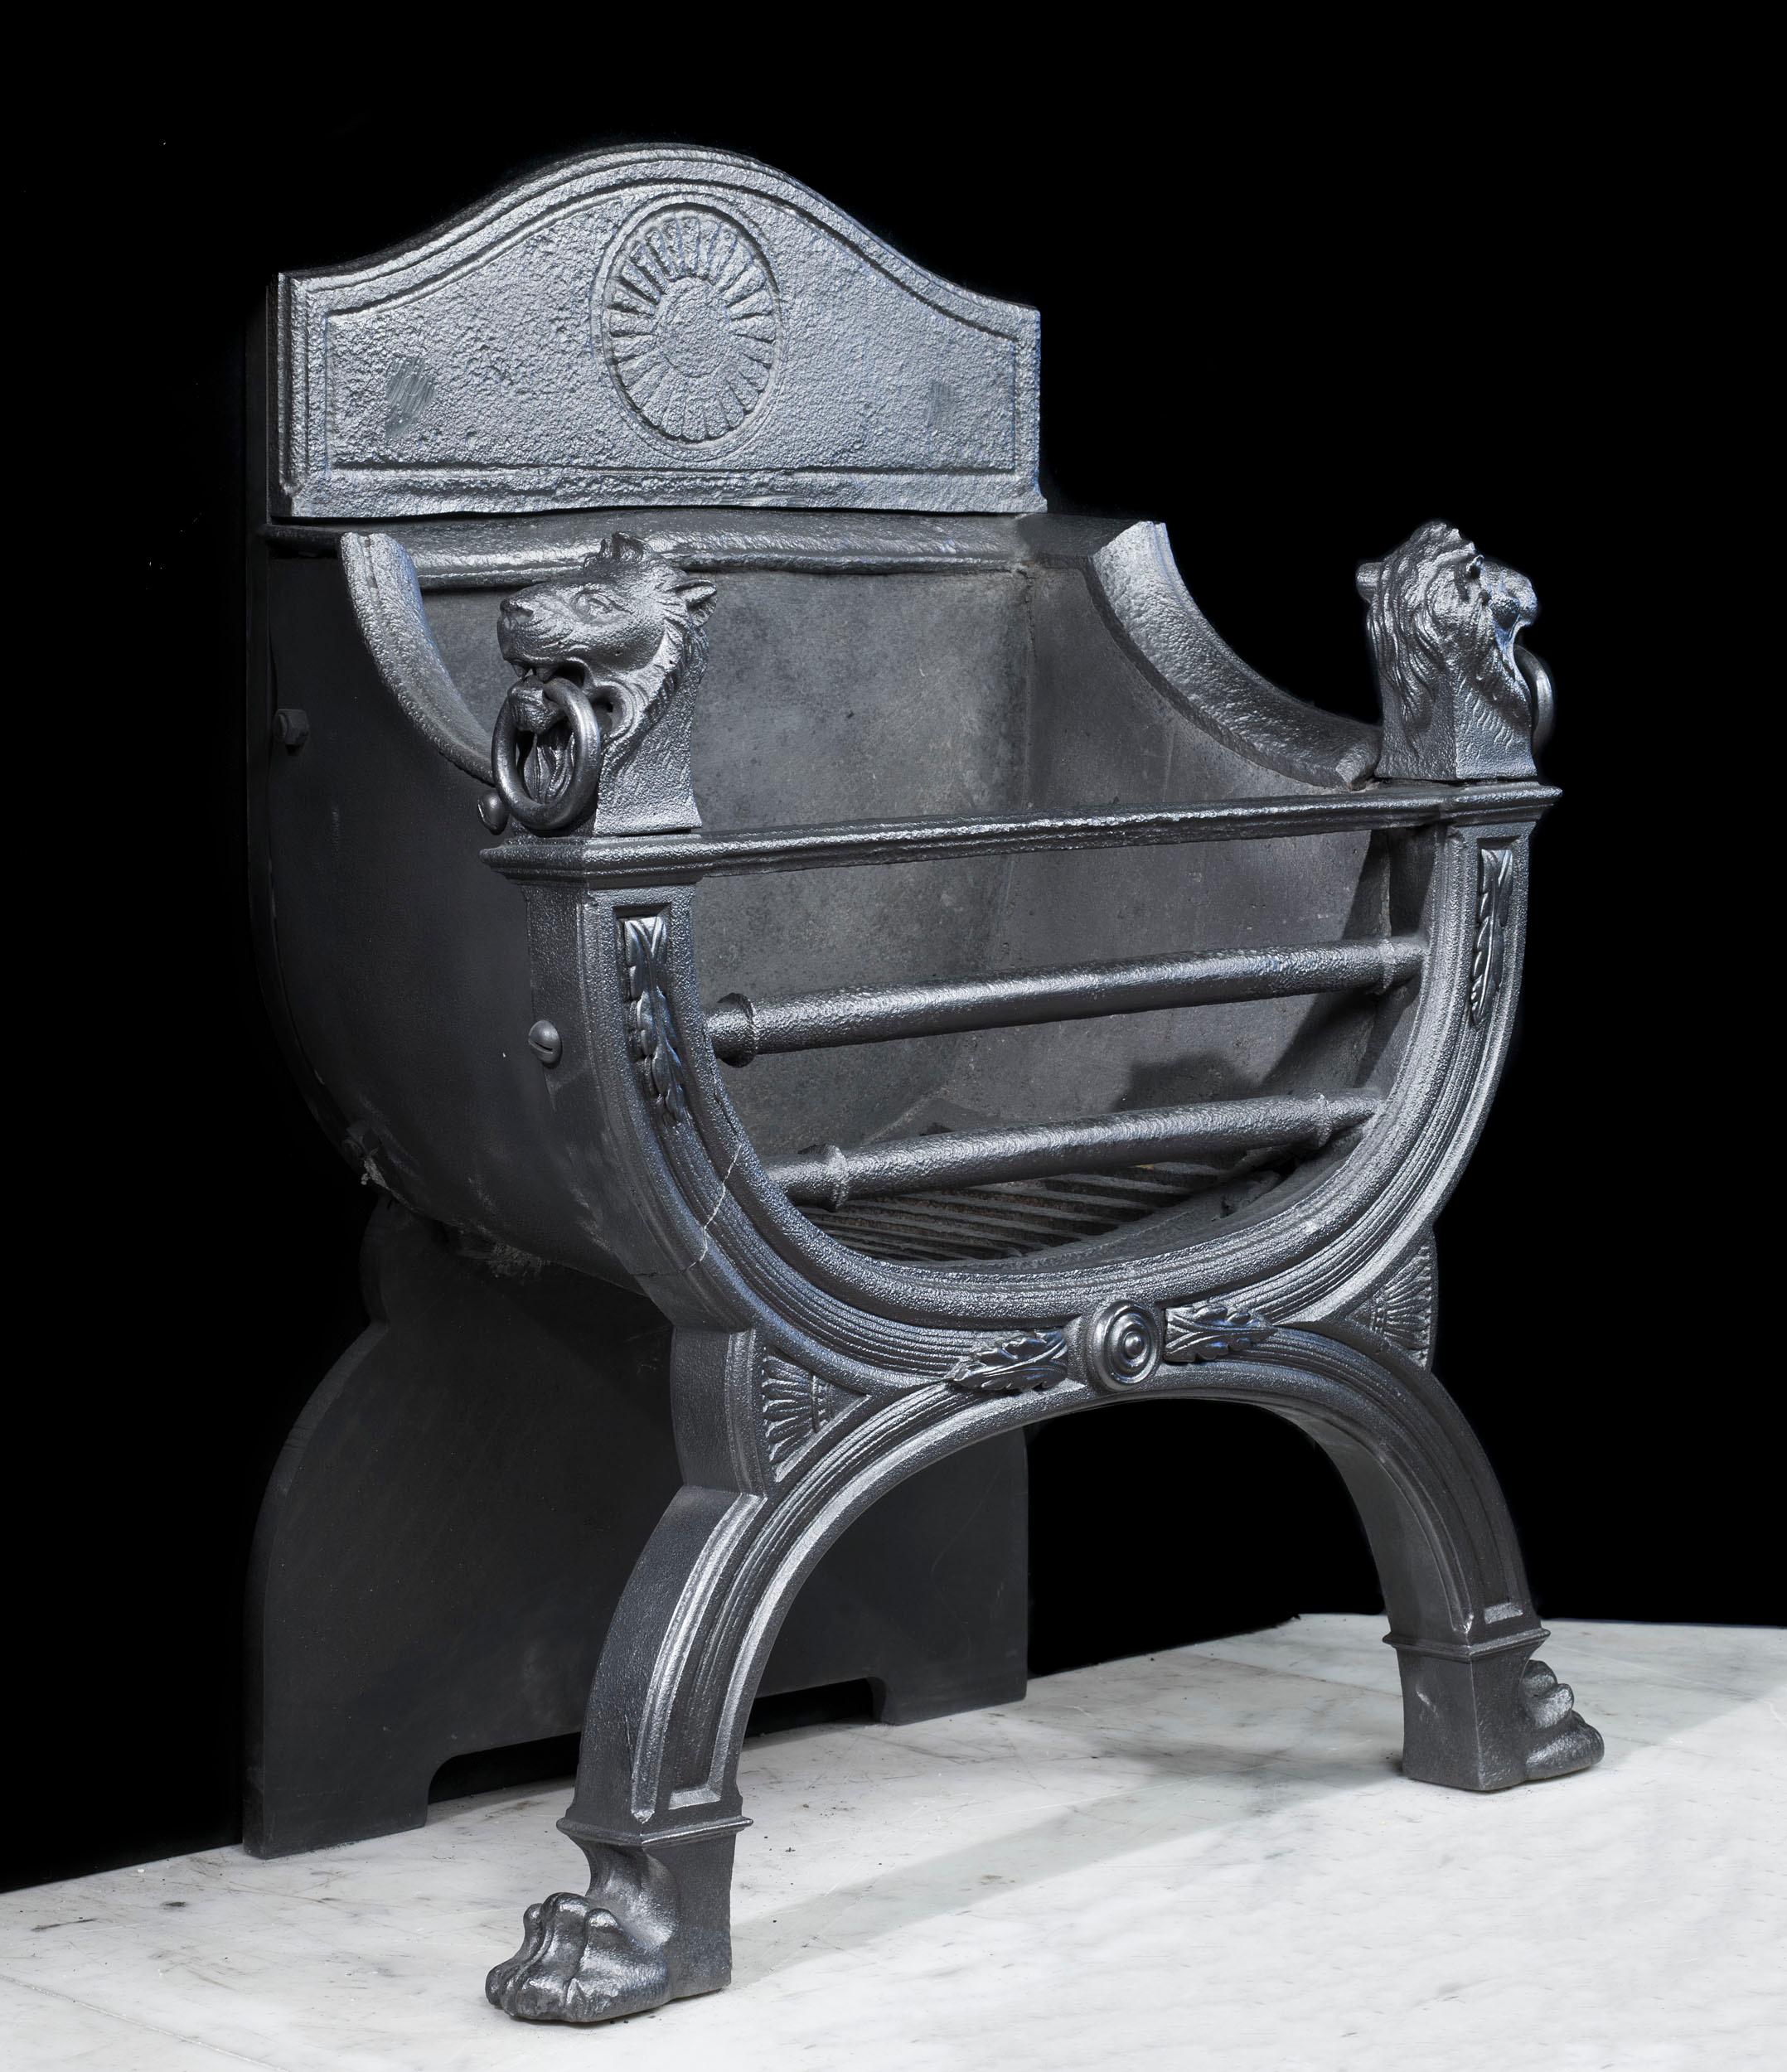 A charming William IV cast iron fire basket in a shape reminiscent of a Savonarola chair, adorned with ringed lion masks.
English, circa 1830.